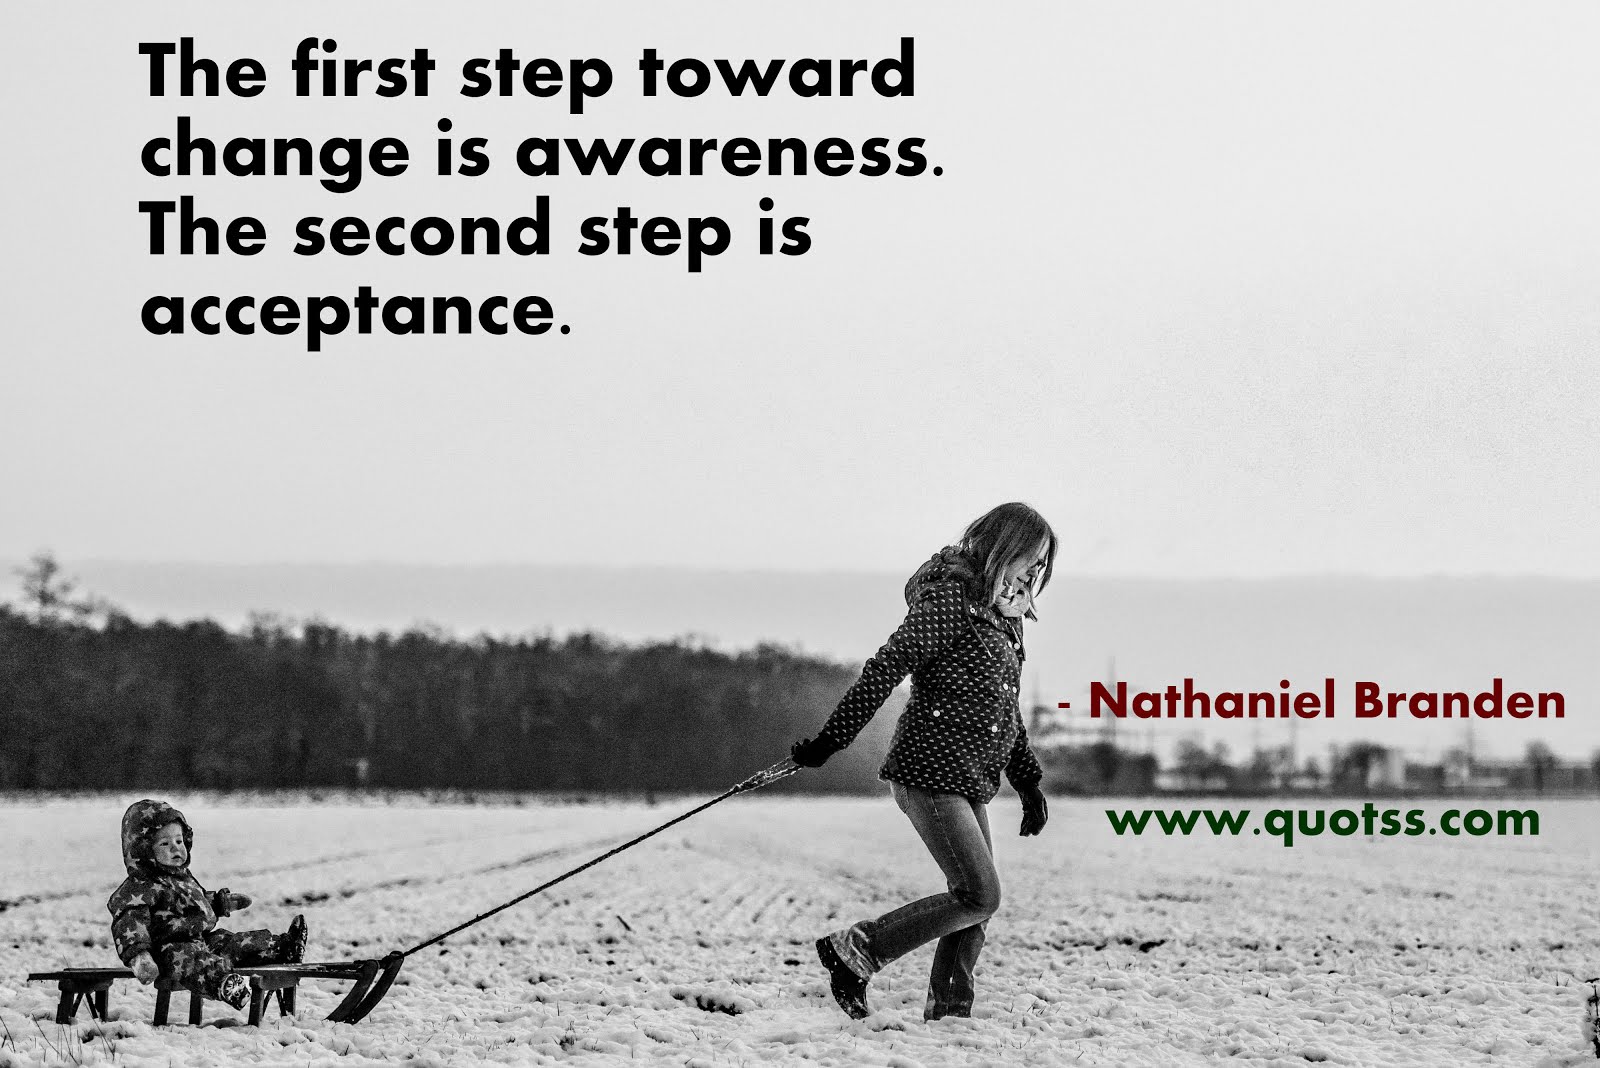 Image Quote on Quotss - The first step toward change is awareness. The second step is acceptance by